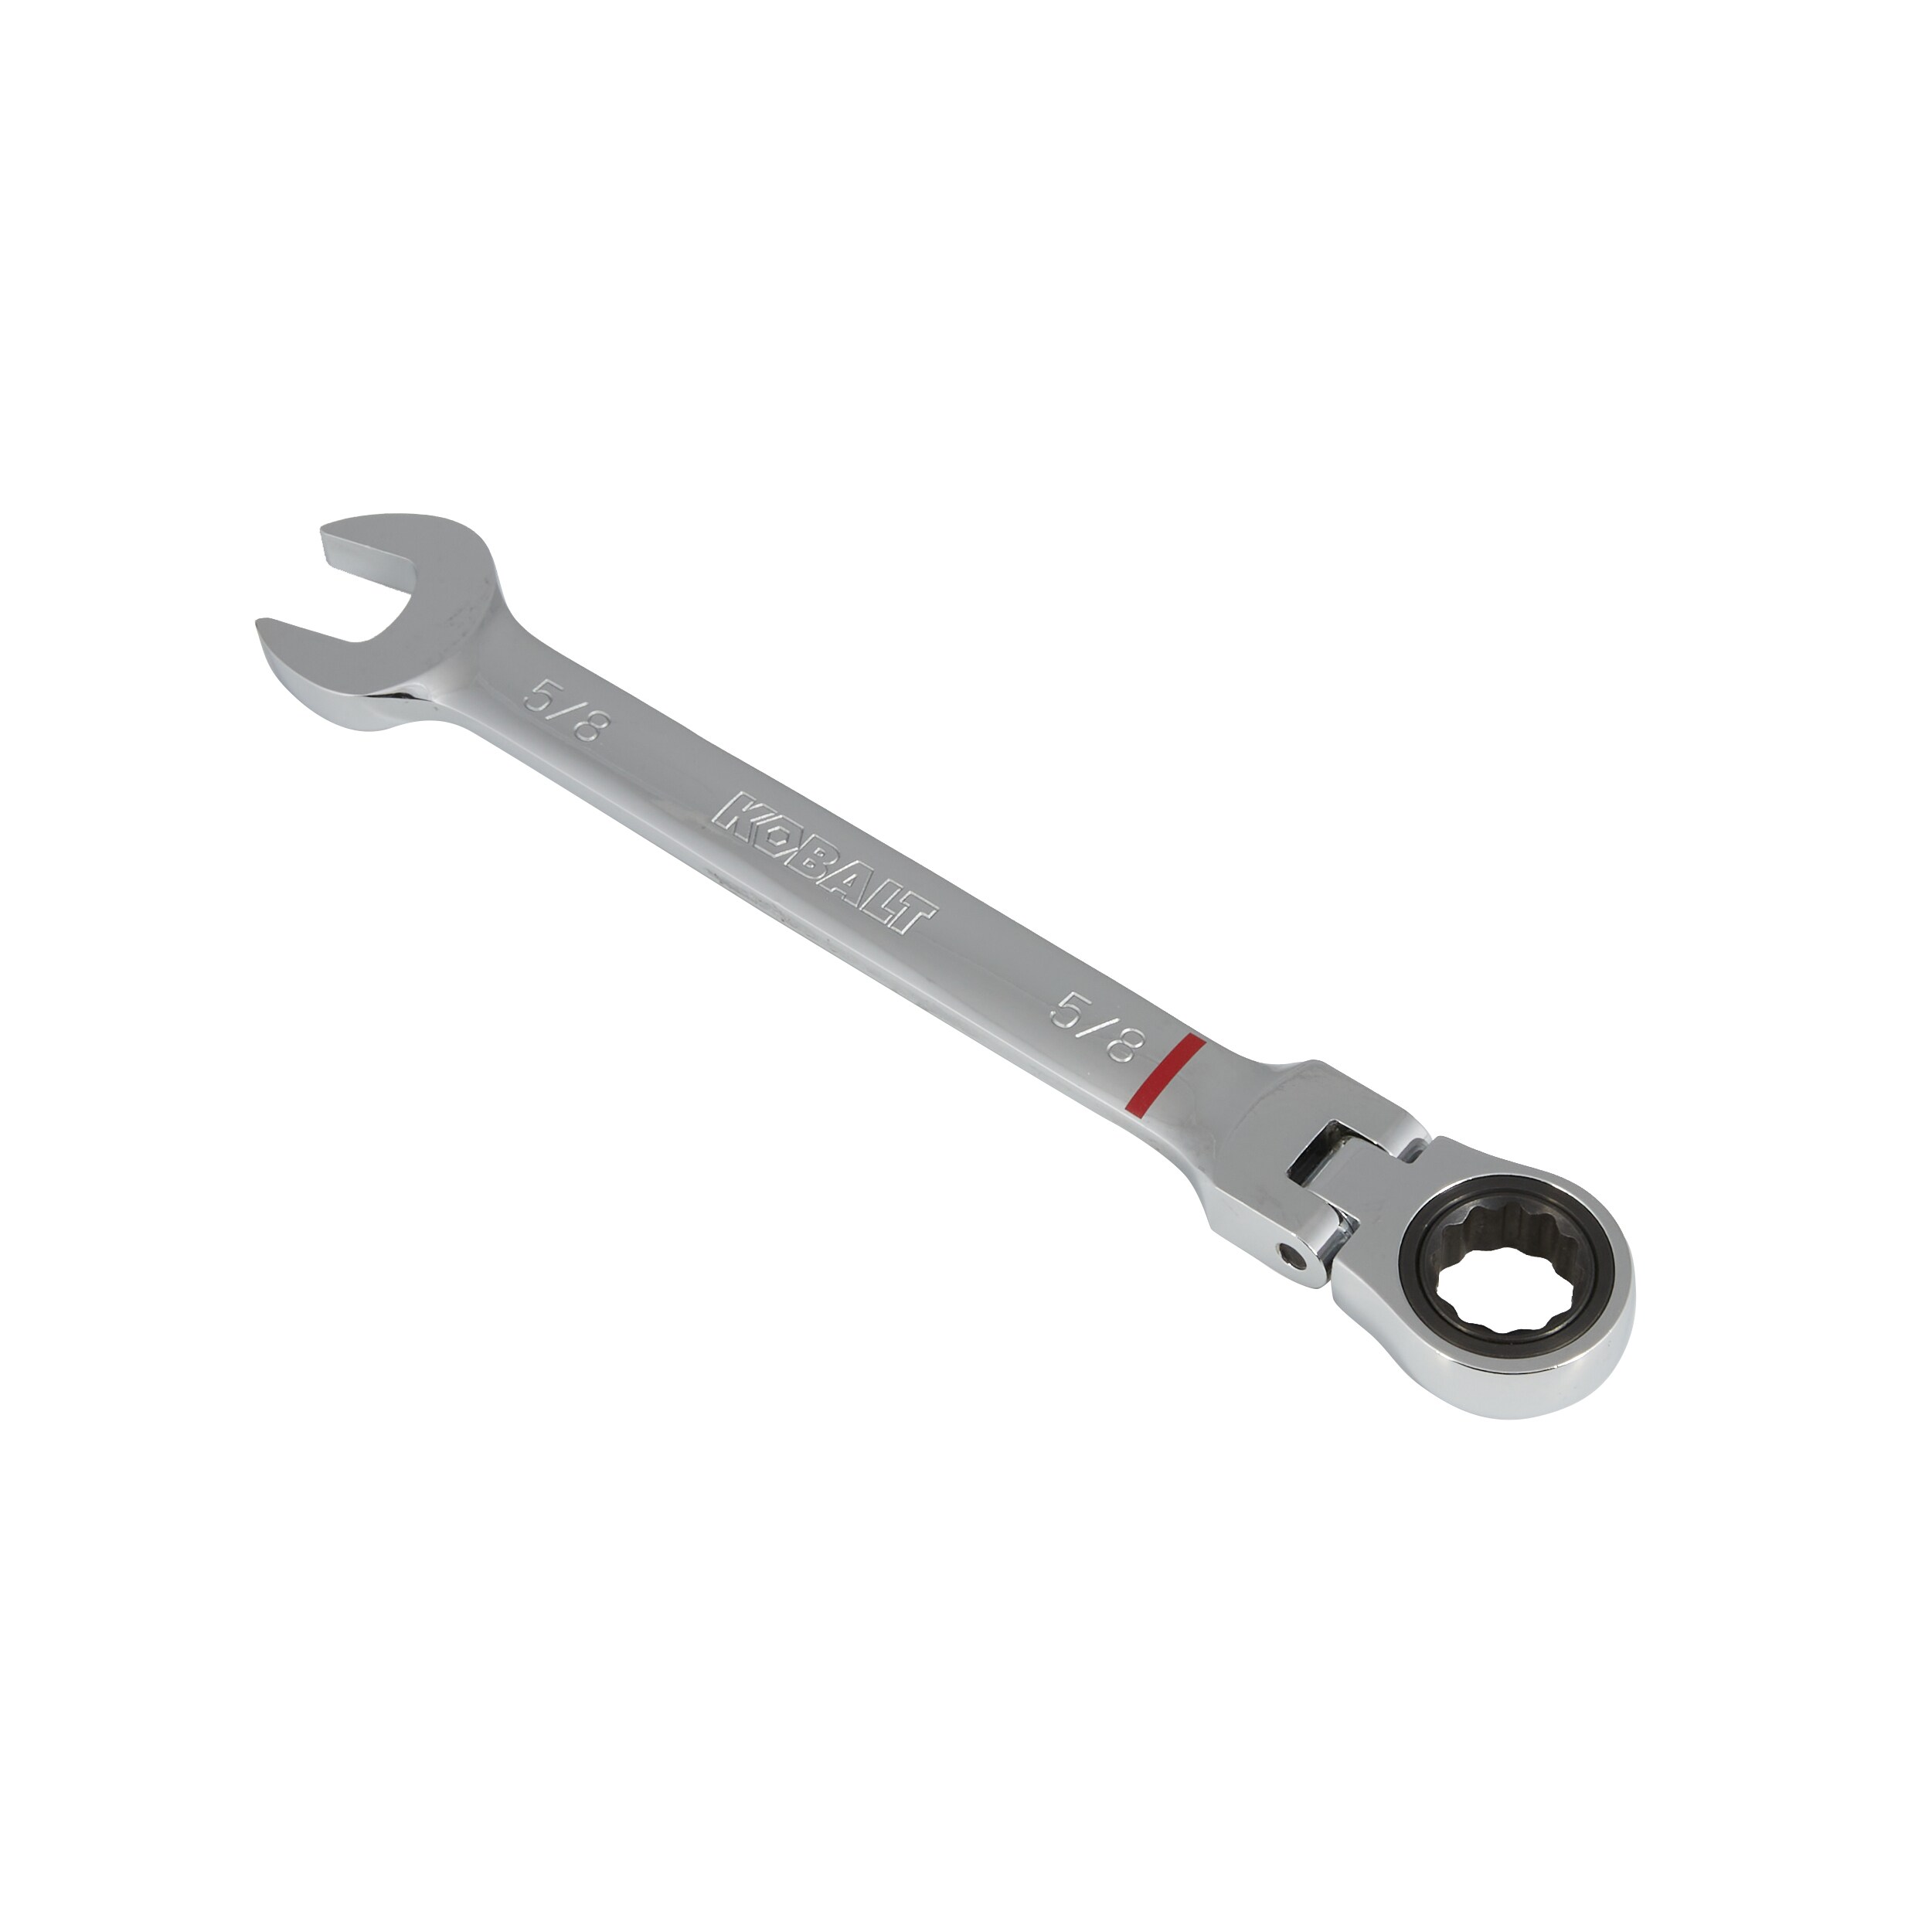 5/8" inch SAE Combination Wrench Ratcheting 8-1/2" Length Flex Head Wrench 